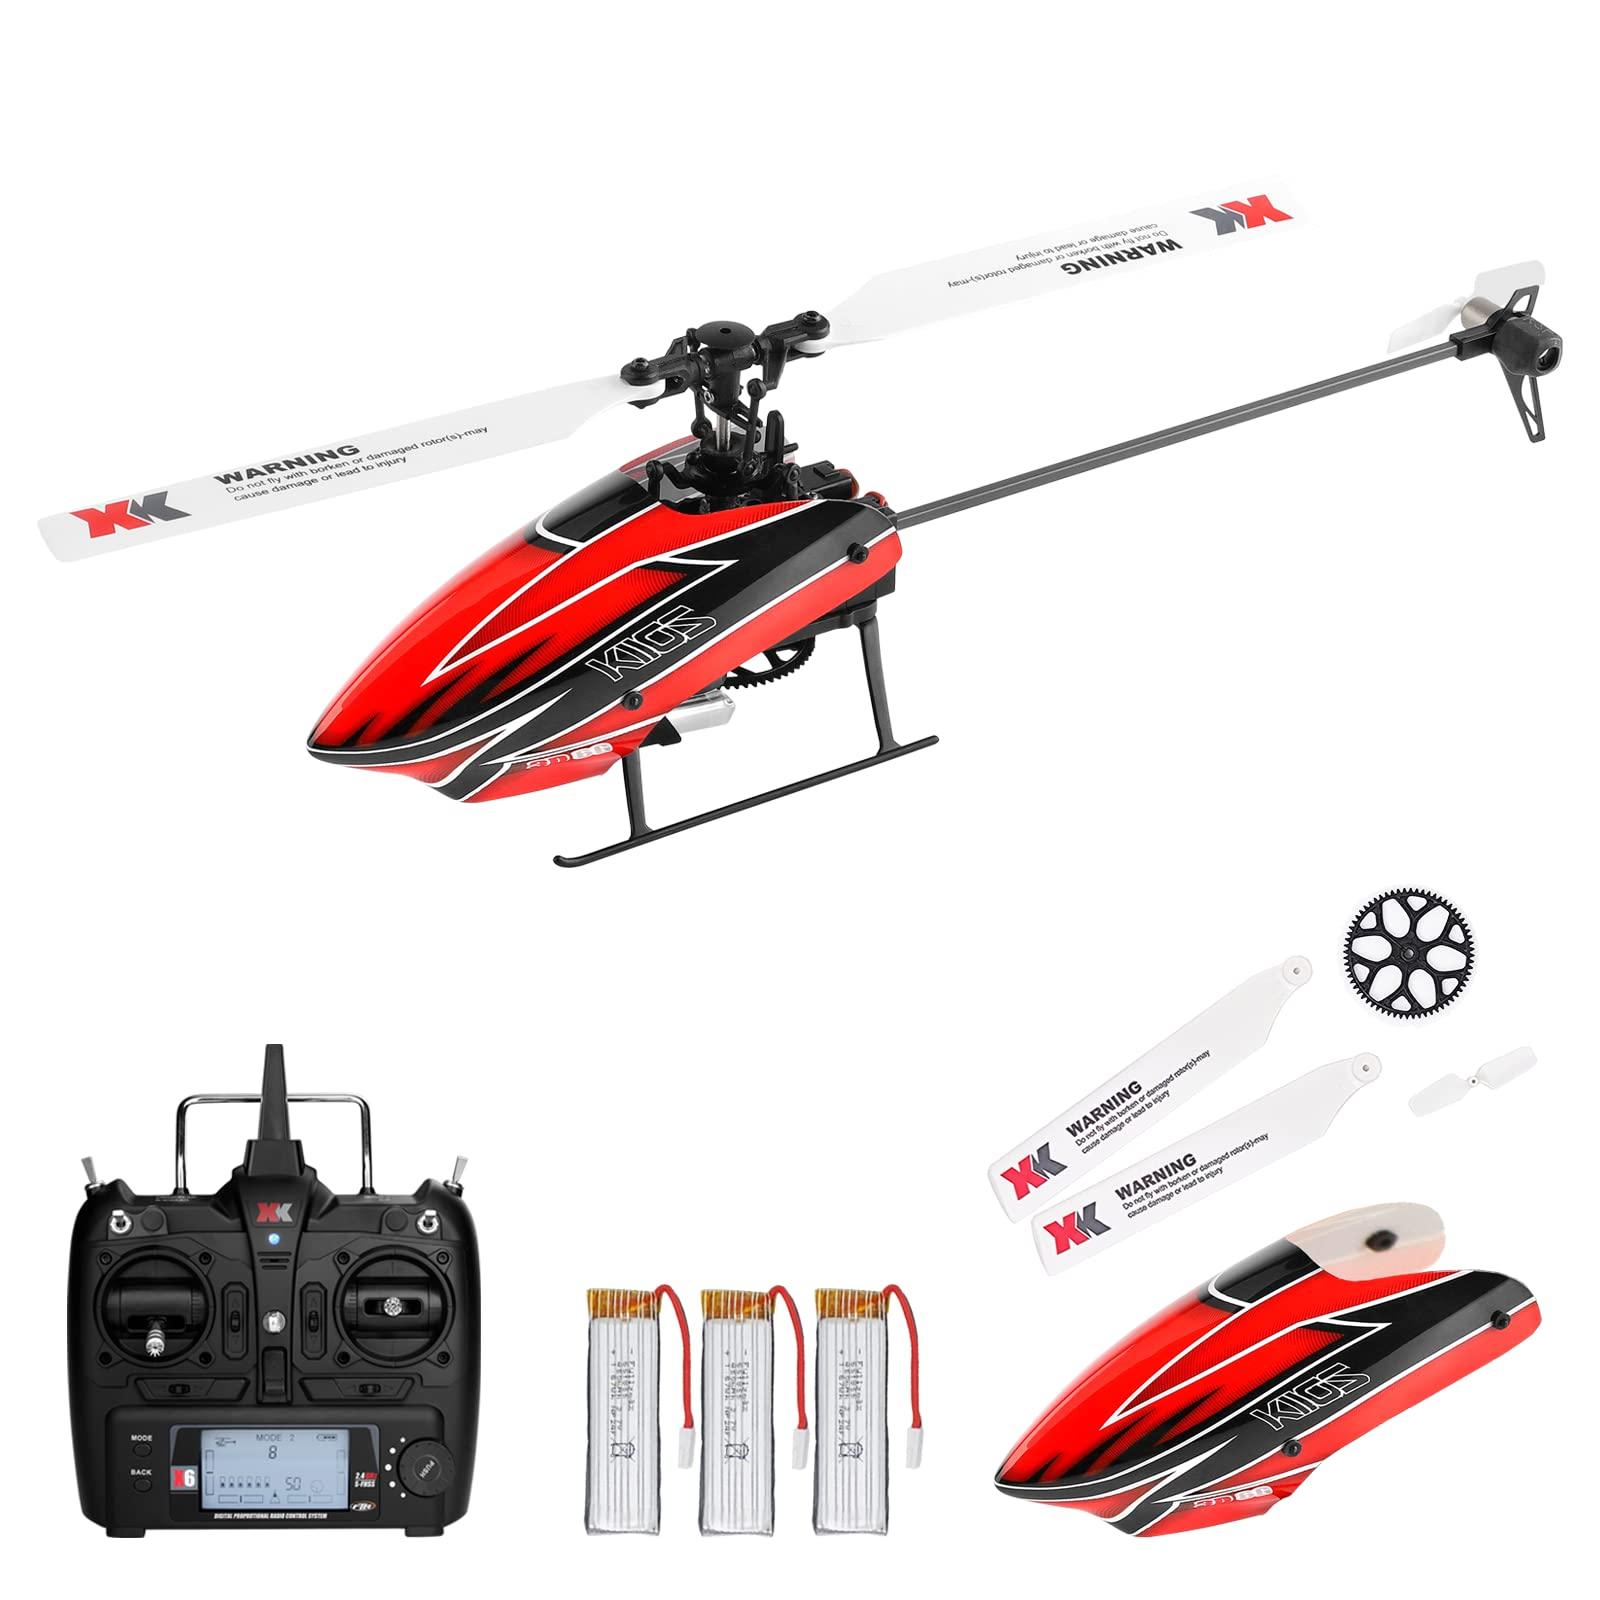 Best Rc Heli Transmitter: 16 Channel Performance for RC Enthusiasts